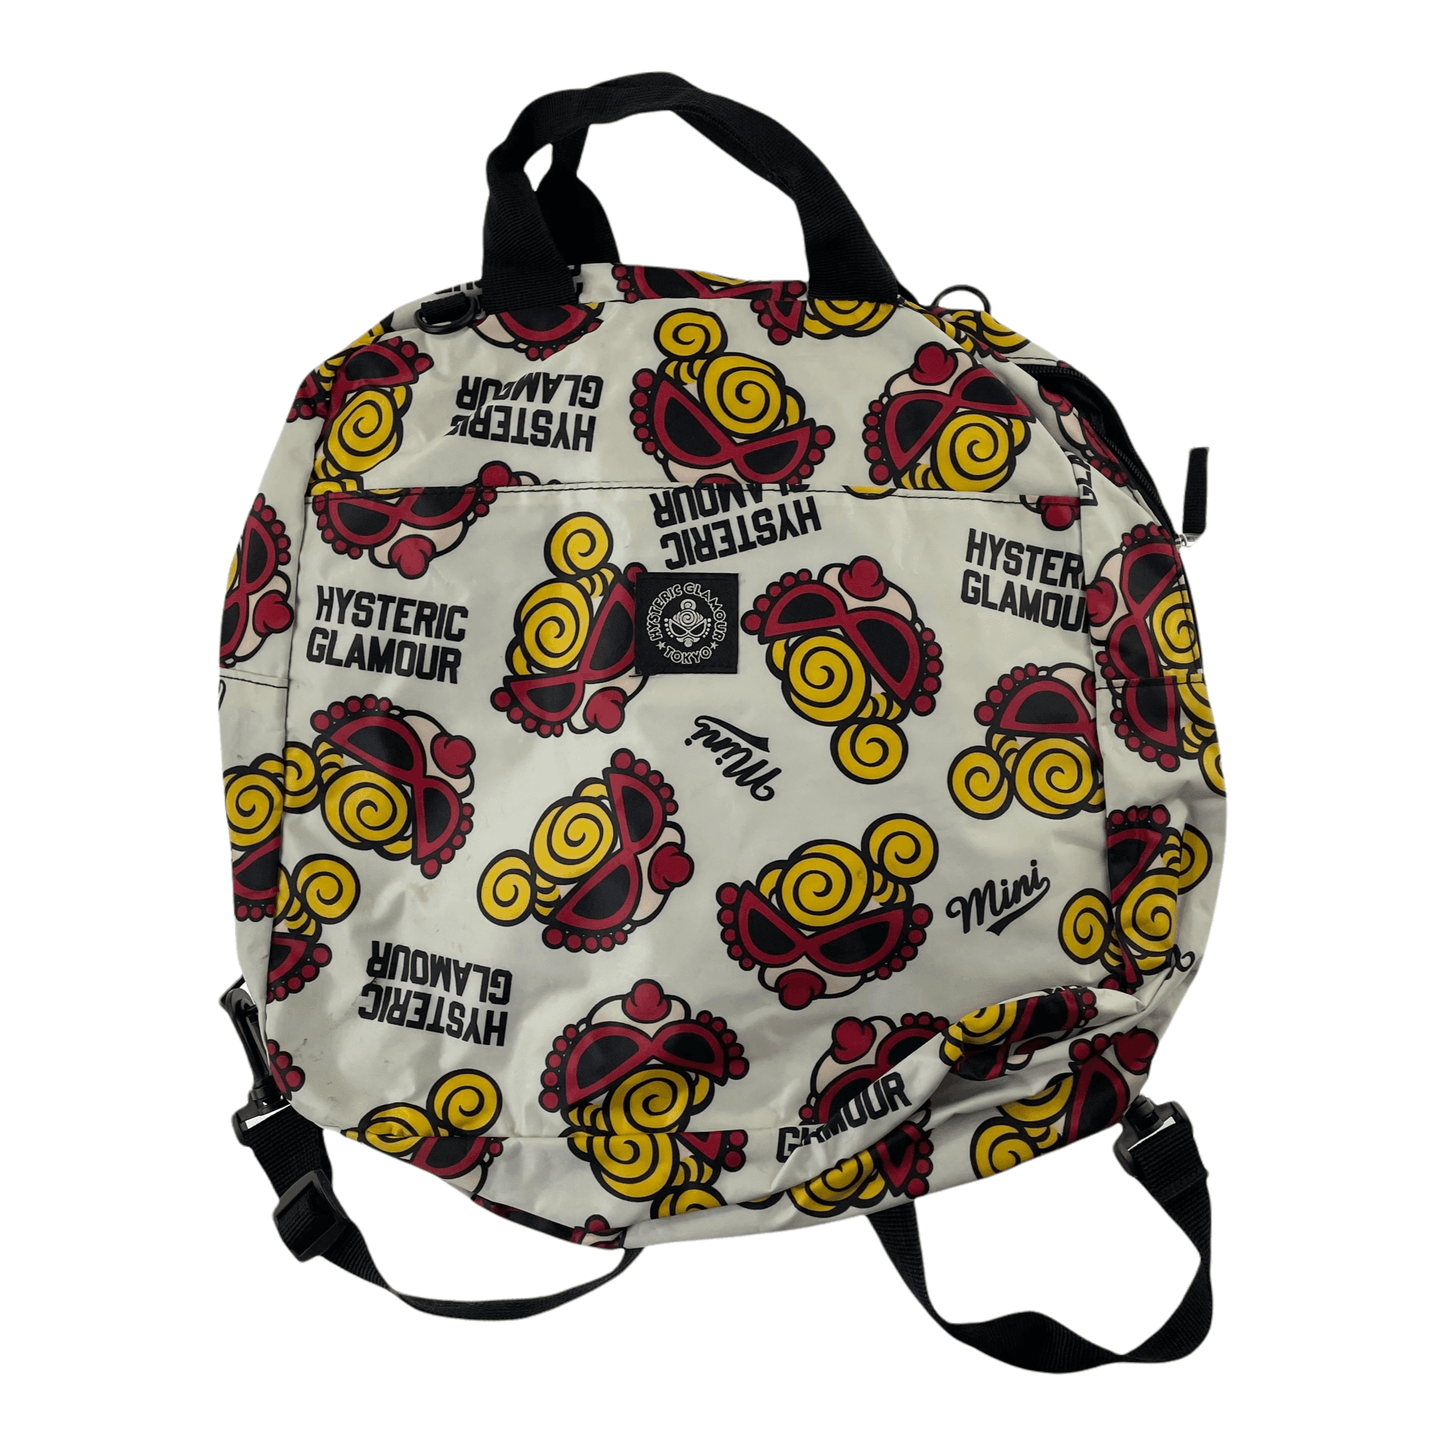 Hysteric Glamour doll print backpack rucksack bag - Known Source